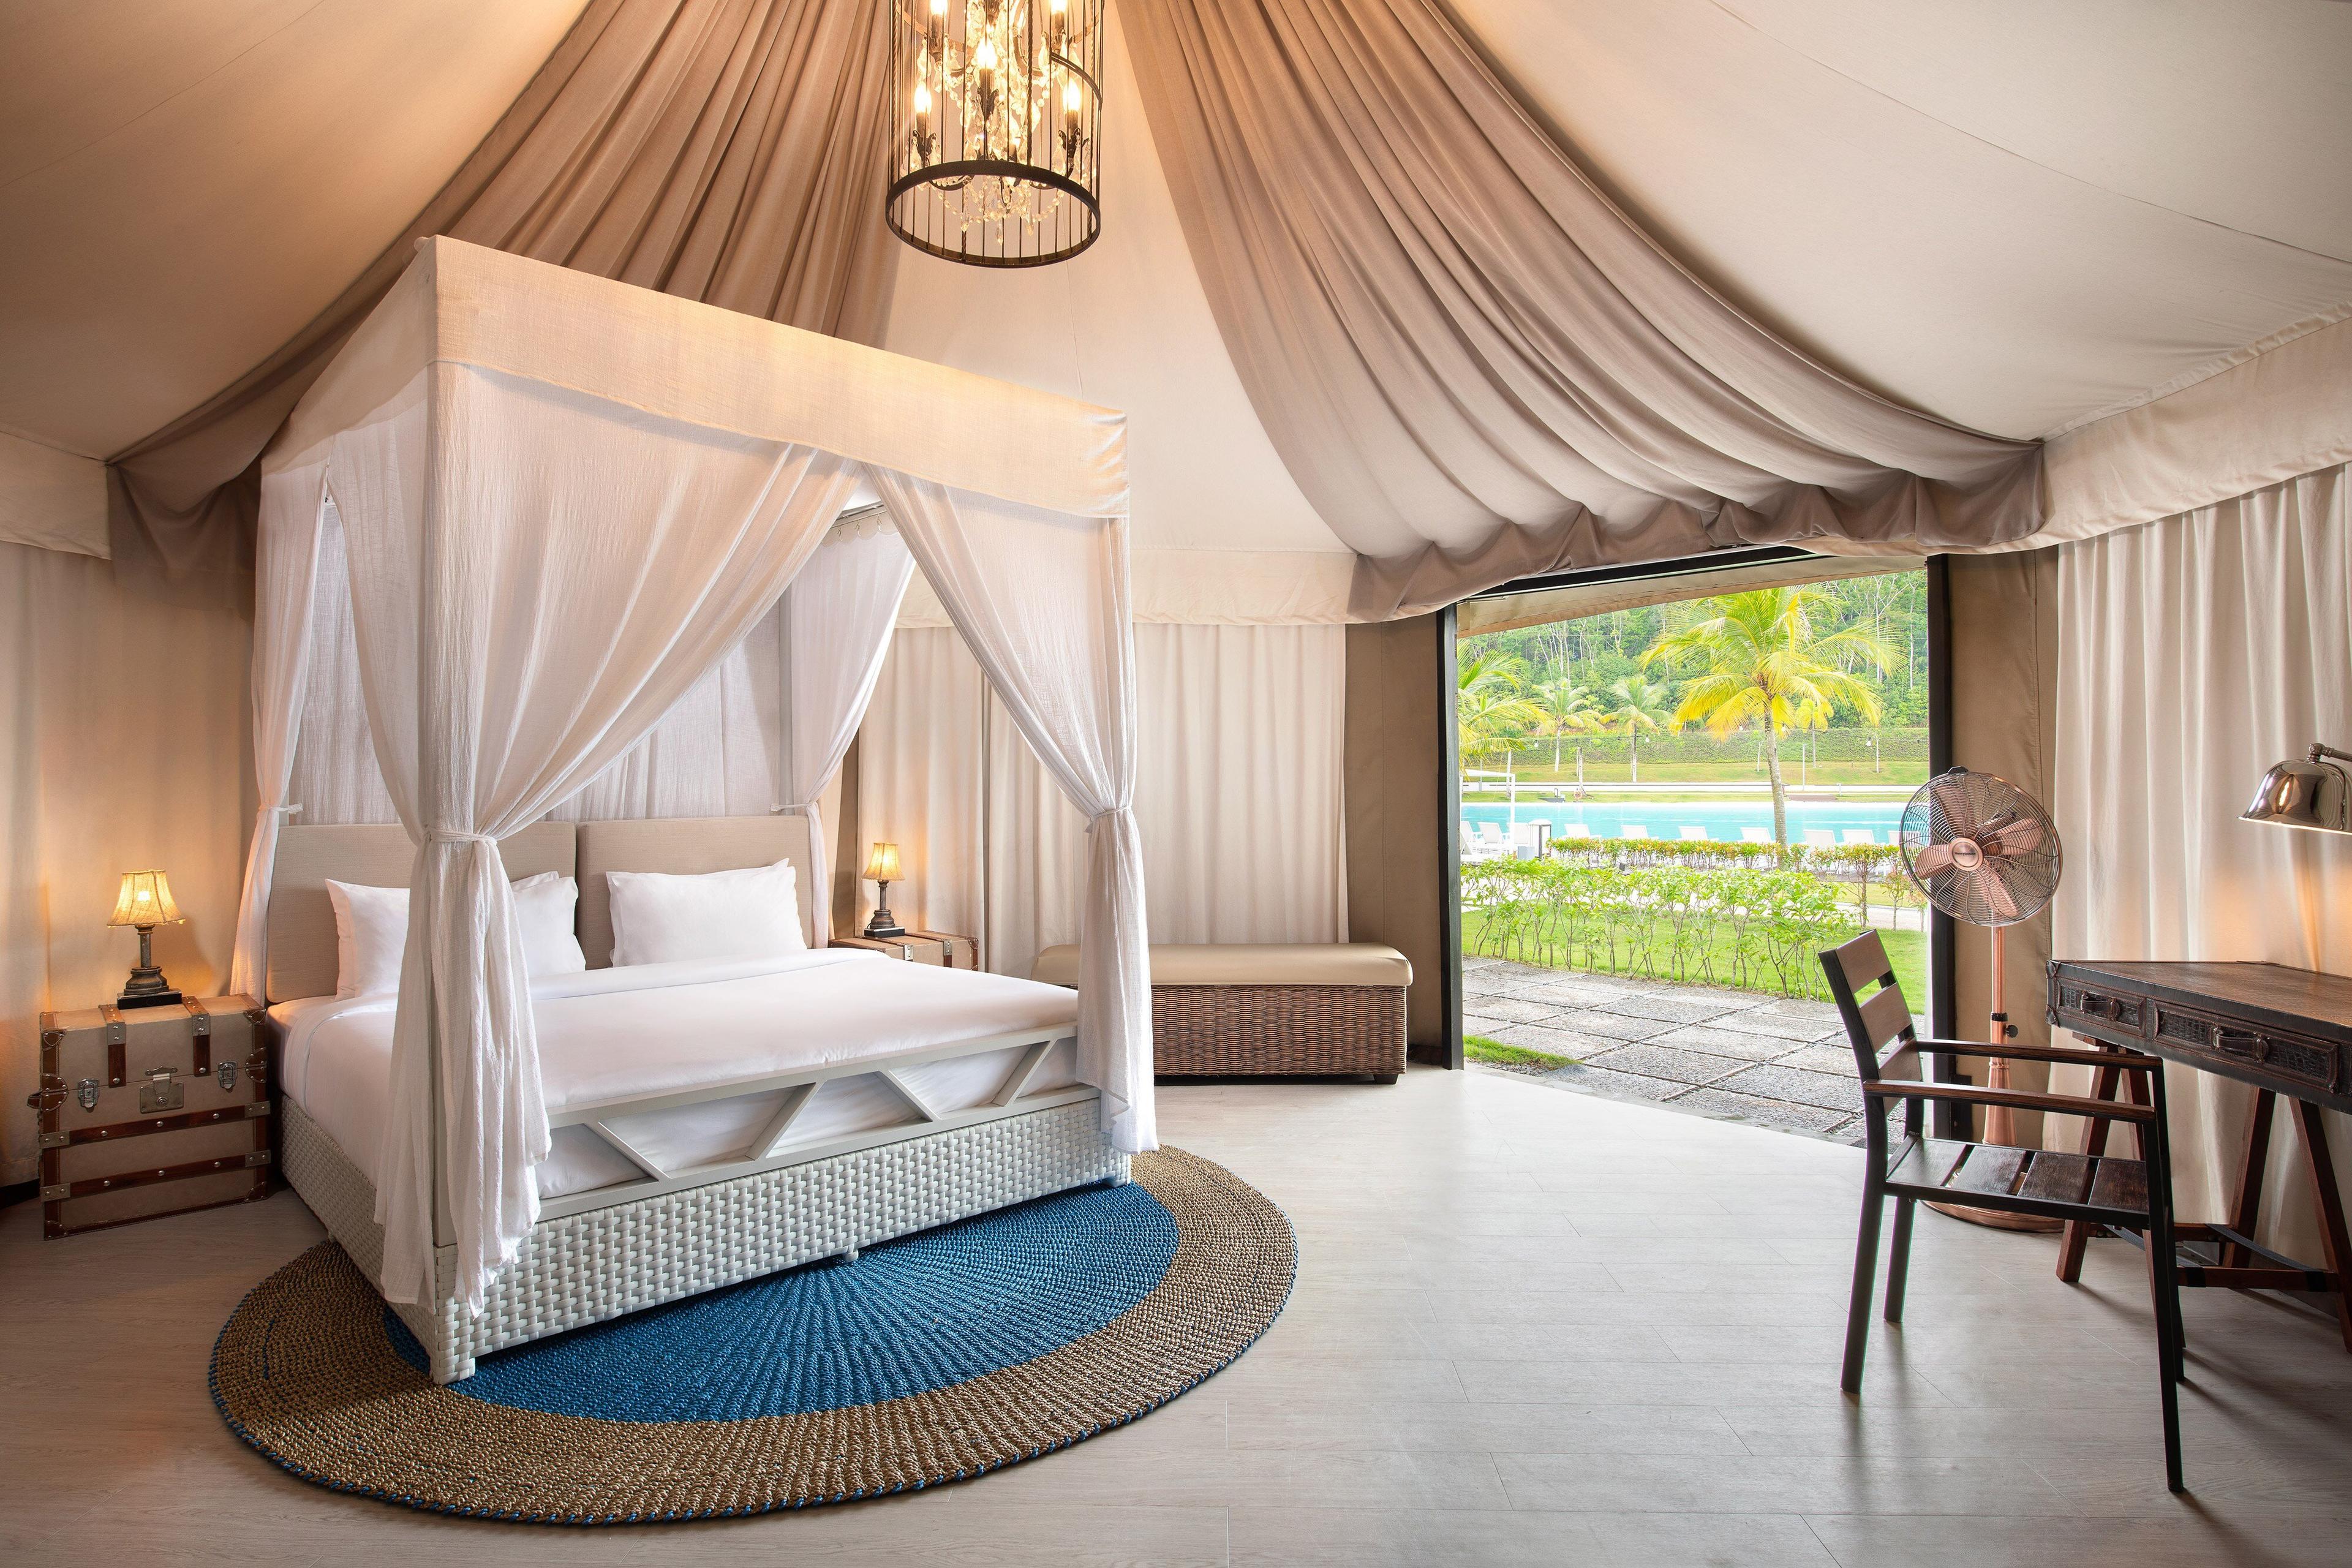 Lagoon View Deluxe Tent is over 40 square meters and offer a spectacular view of the crystal blue water. With an outdoor whirlpool in front of the tent, great for those with a bold and indie spirits.